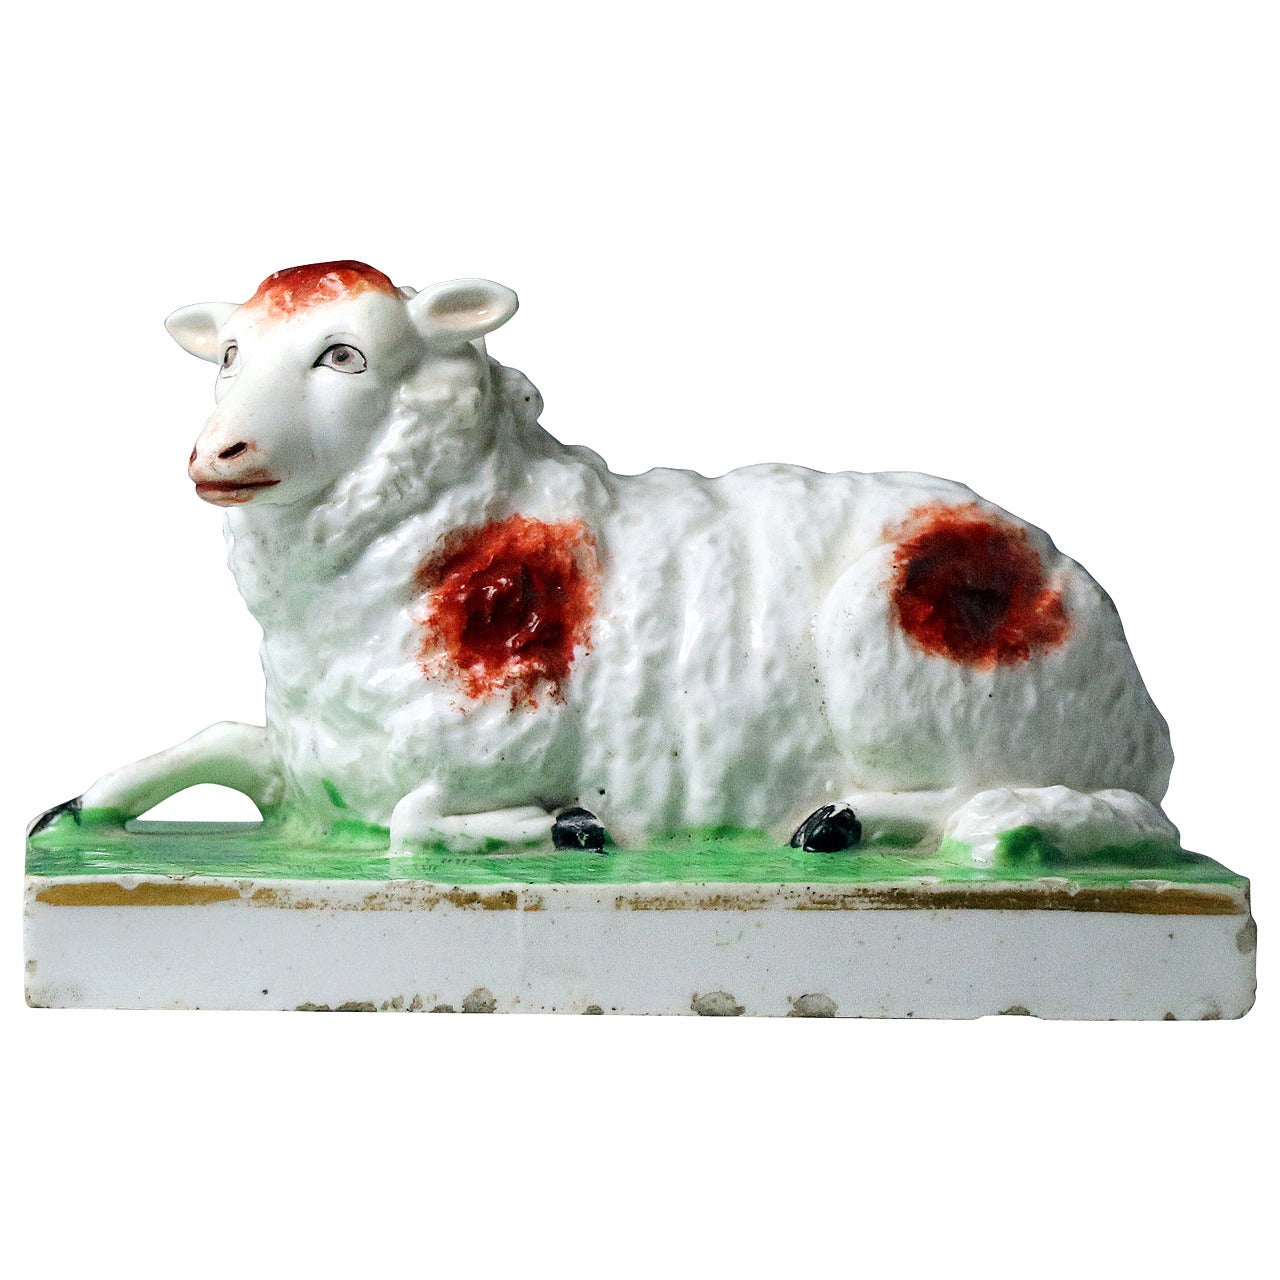 Antique English Porcelain Figure of a Recumbent Sheep on an Oblong Base